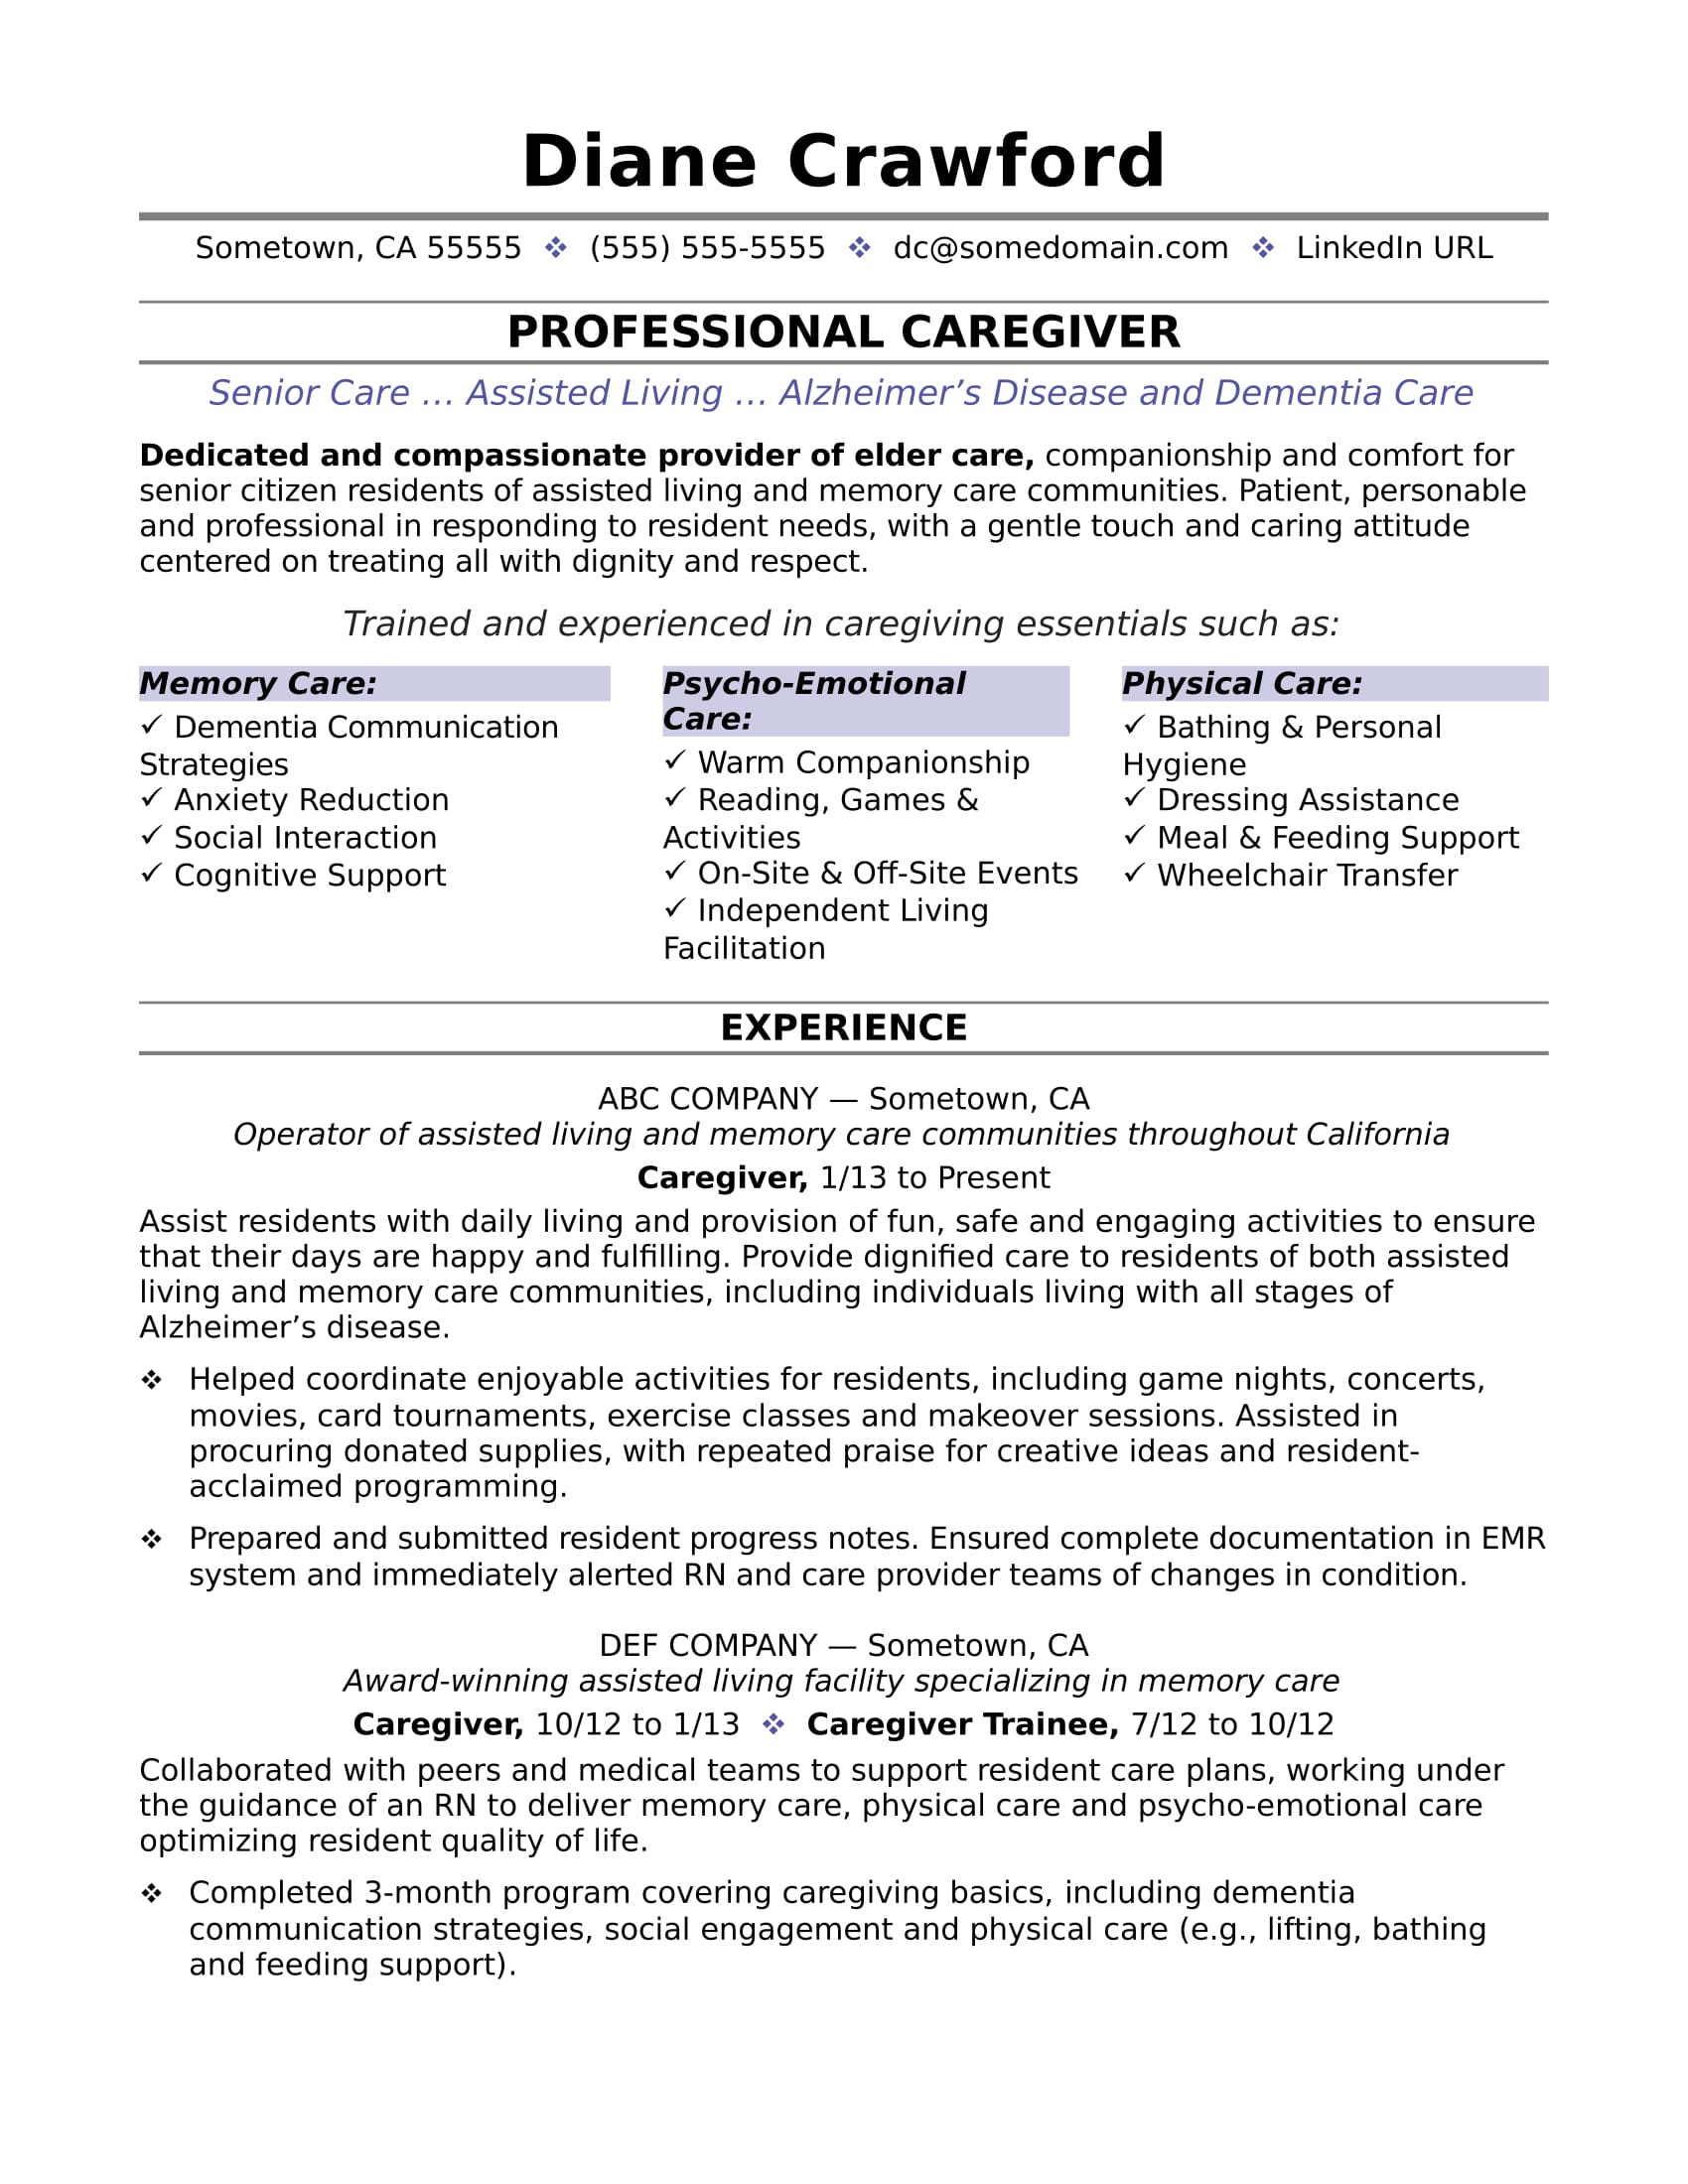 Caregiver Resume Sample  Monster.com With Progress Notes Aged Care Template